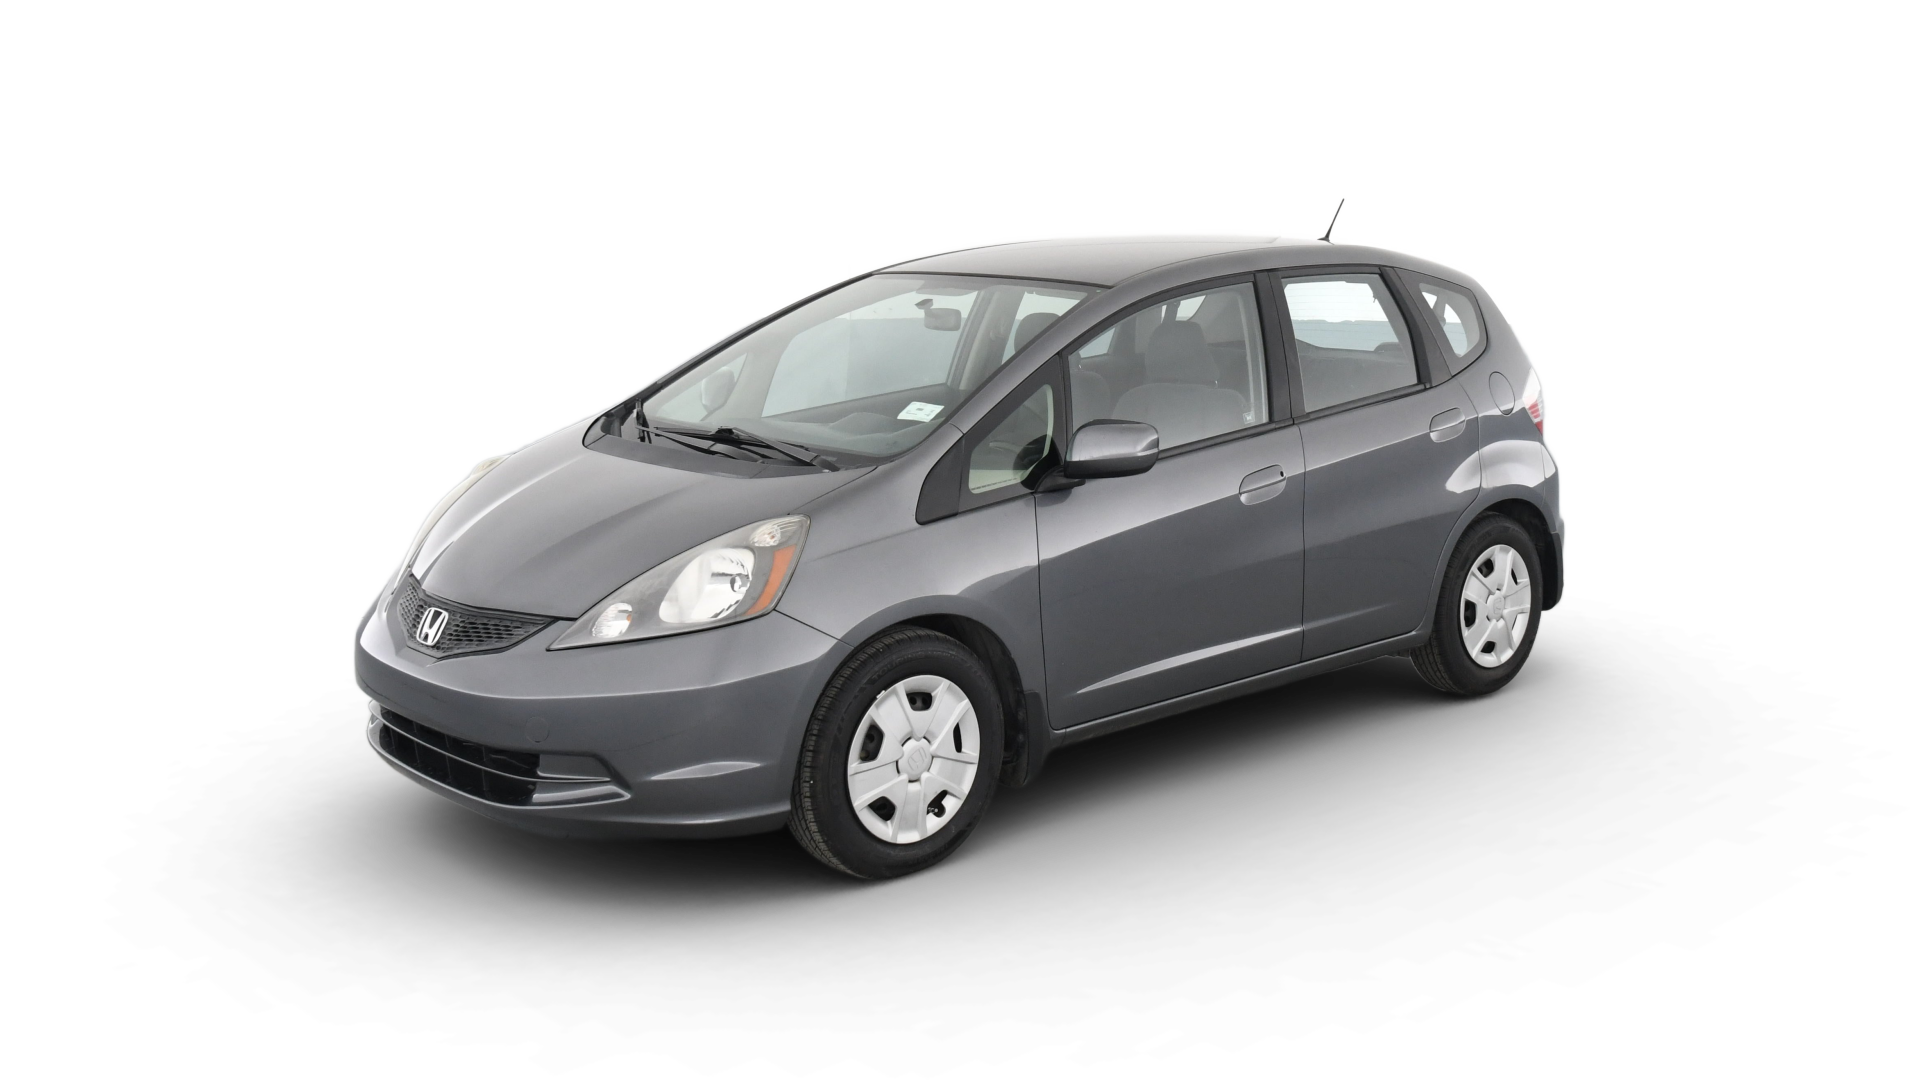 Used 2013 Honda Fit For Sale Online | Carvana